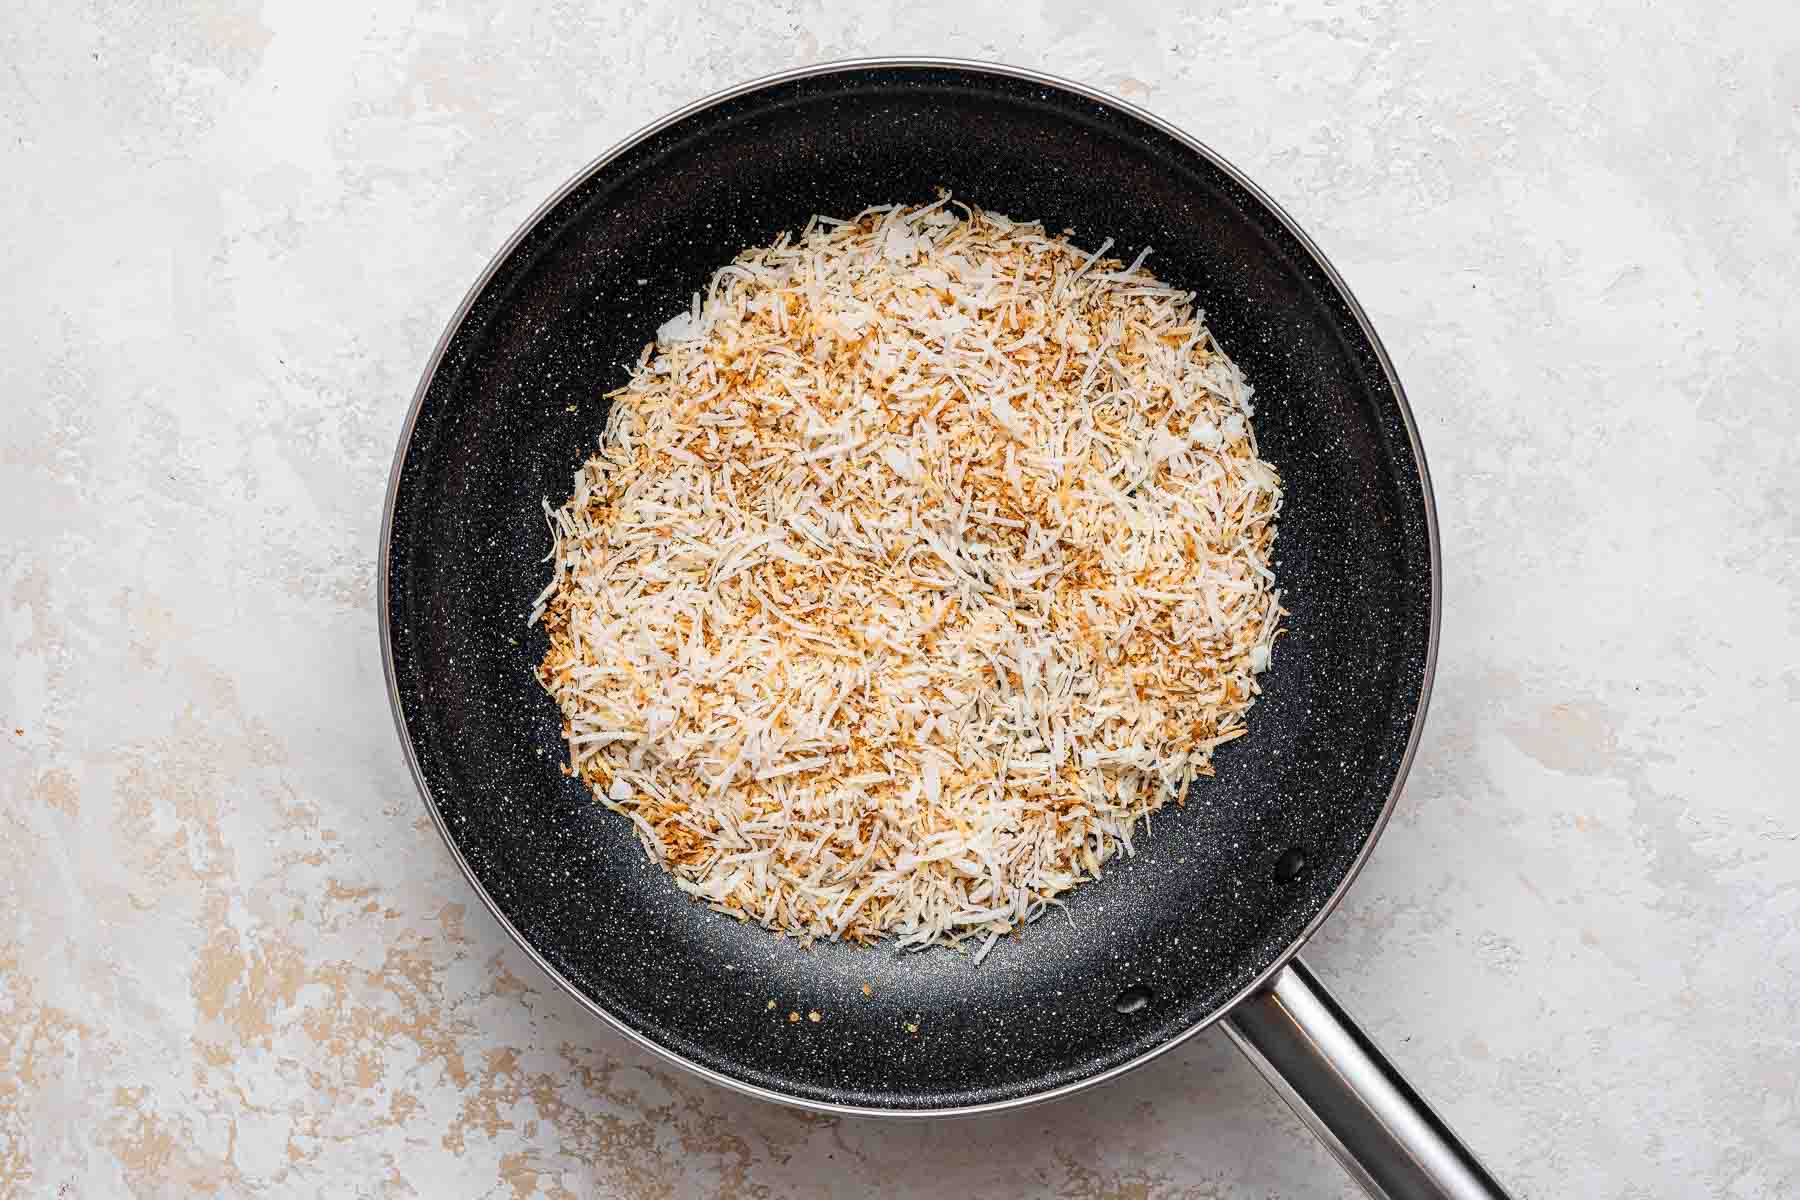 Toasting coconut flakes in a skillet.